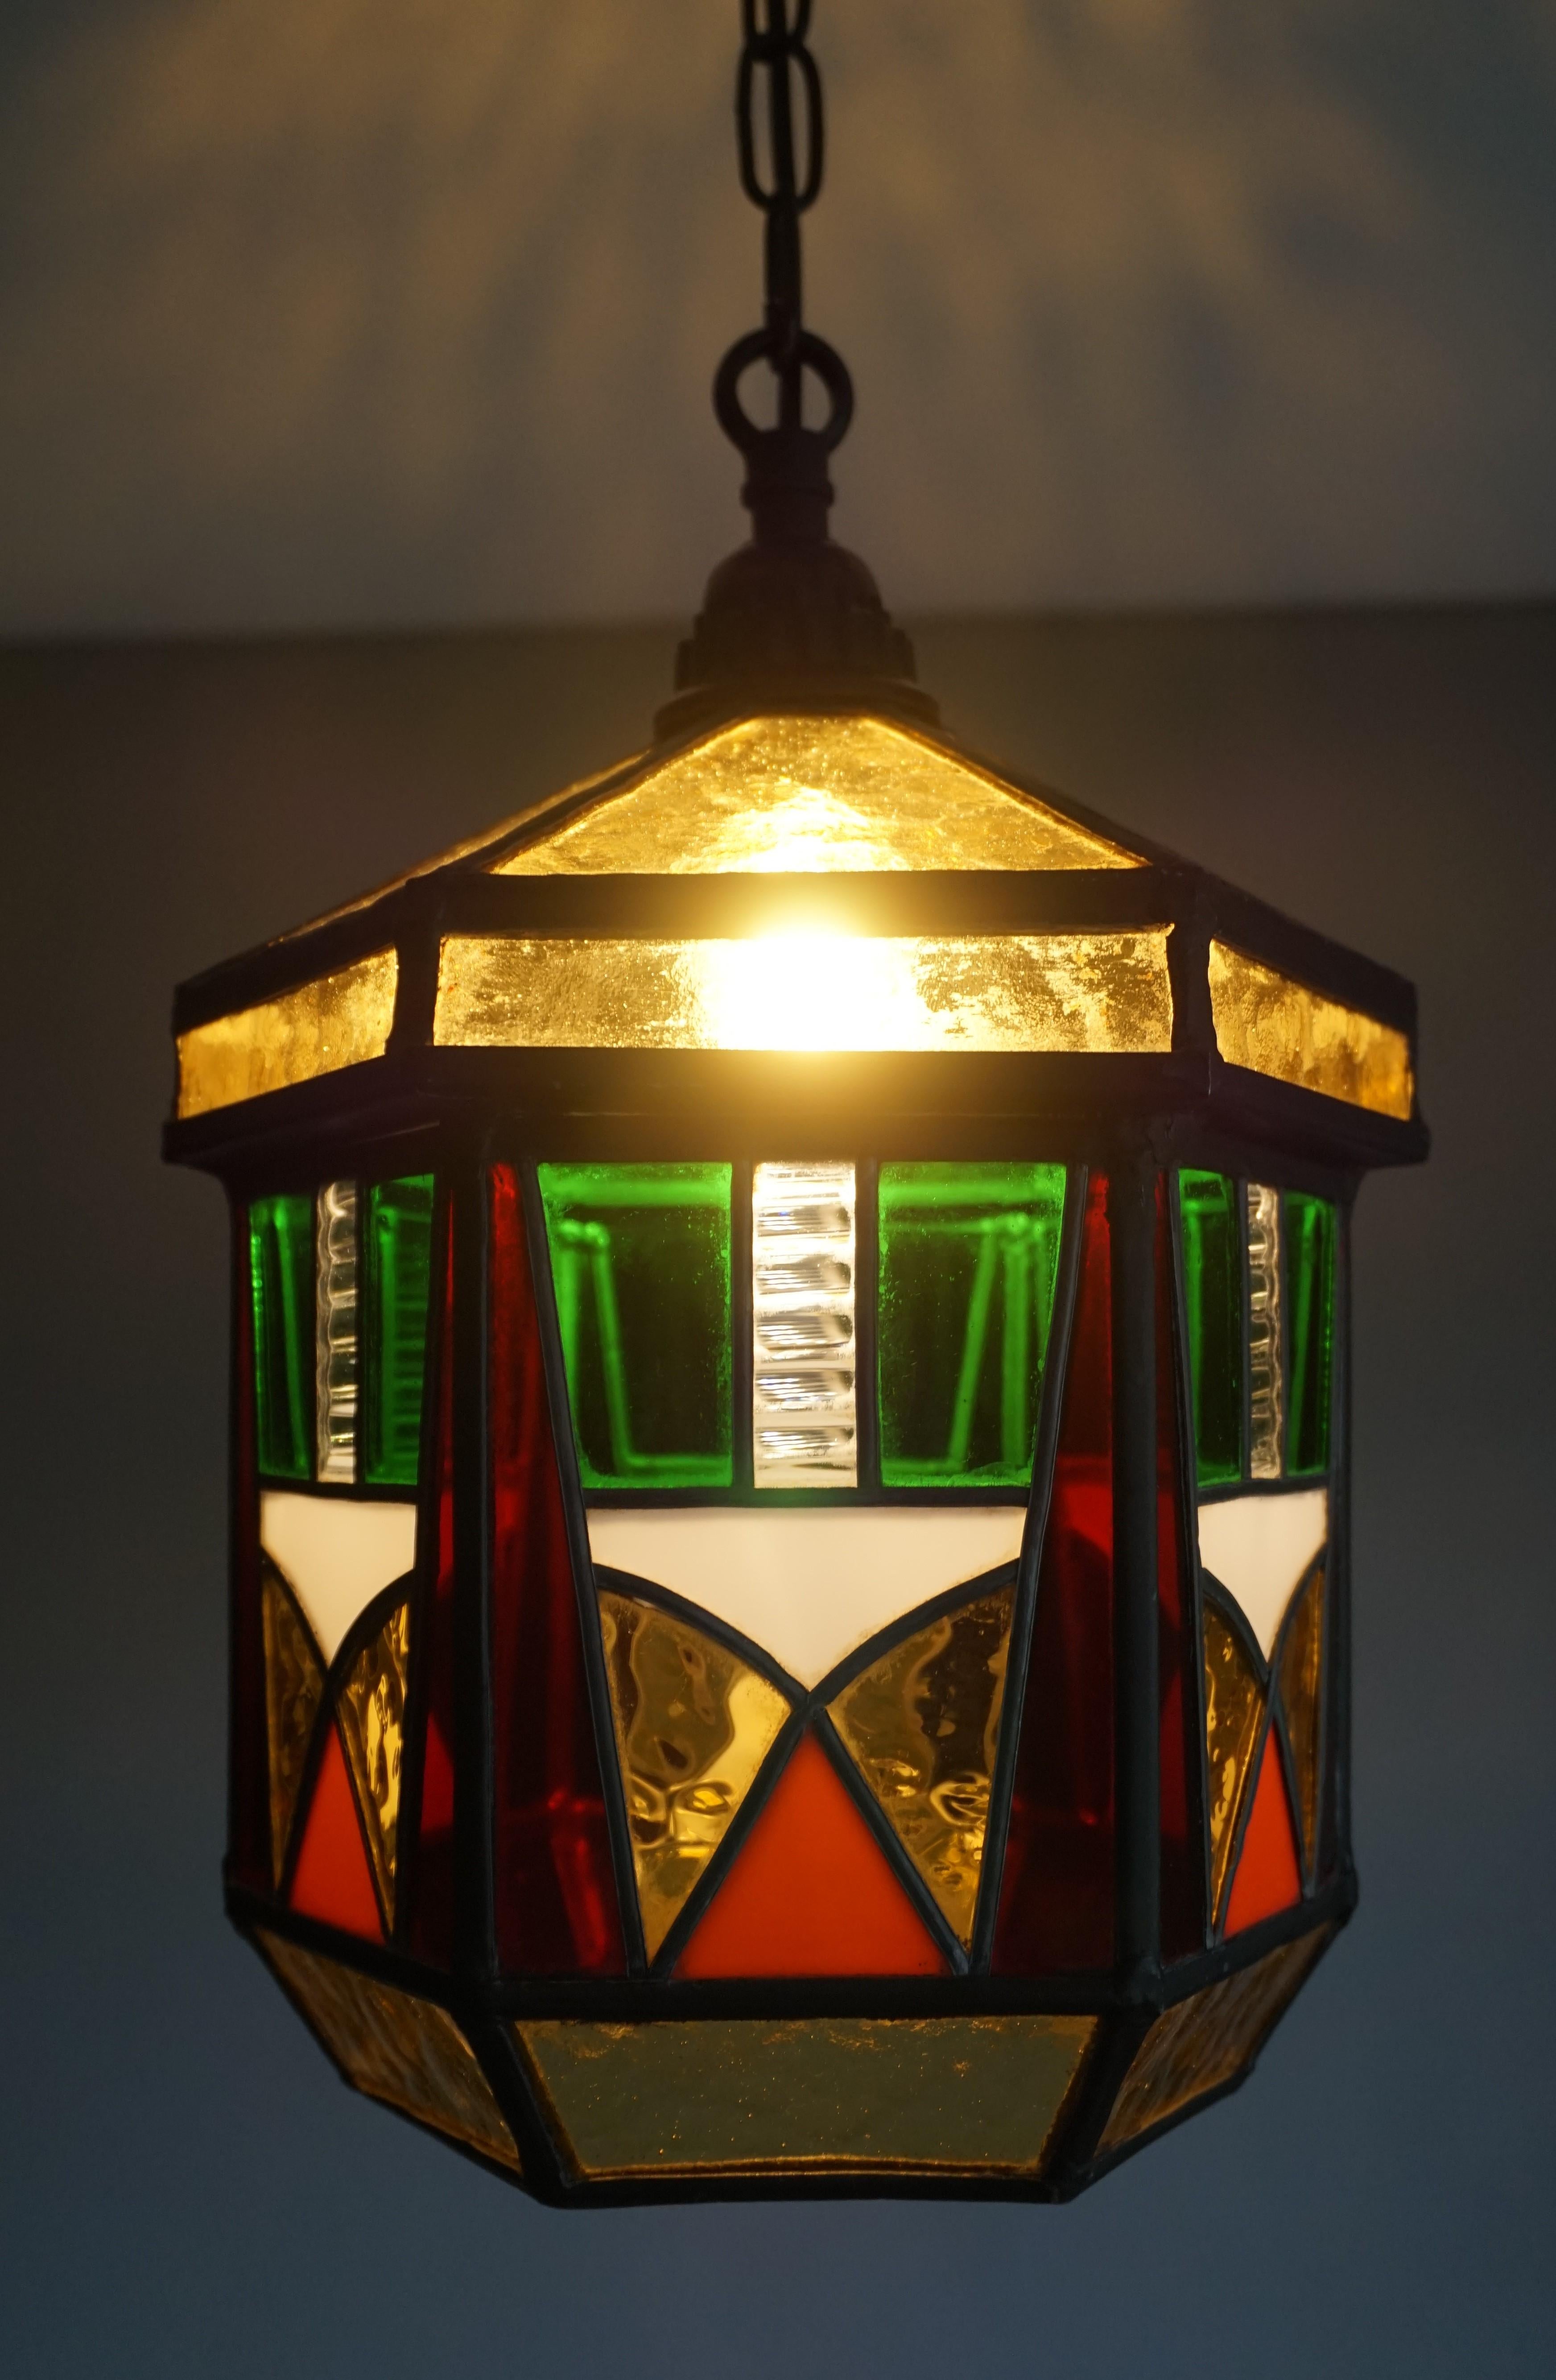 Striking stained glass Art Deco ceiling light.

This hexagonal Art Deco fixture from the 1920s is the perfect lighting solution for an entry hall or landing. This handcrafted pendant with its straight lined patterns and wonderful warm colors